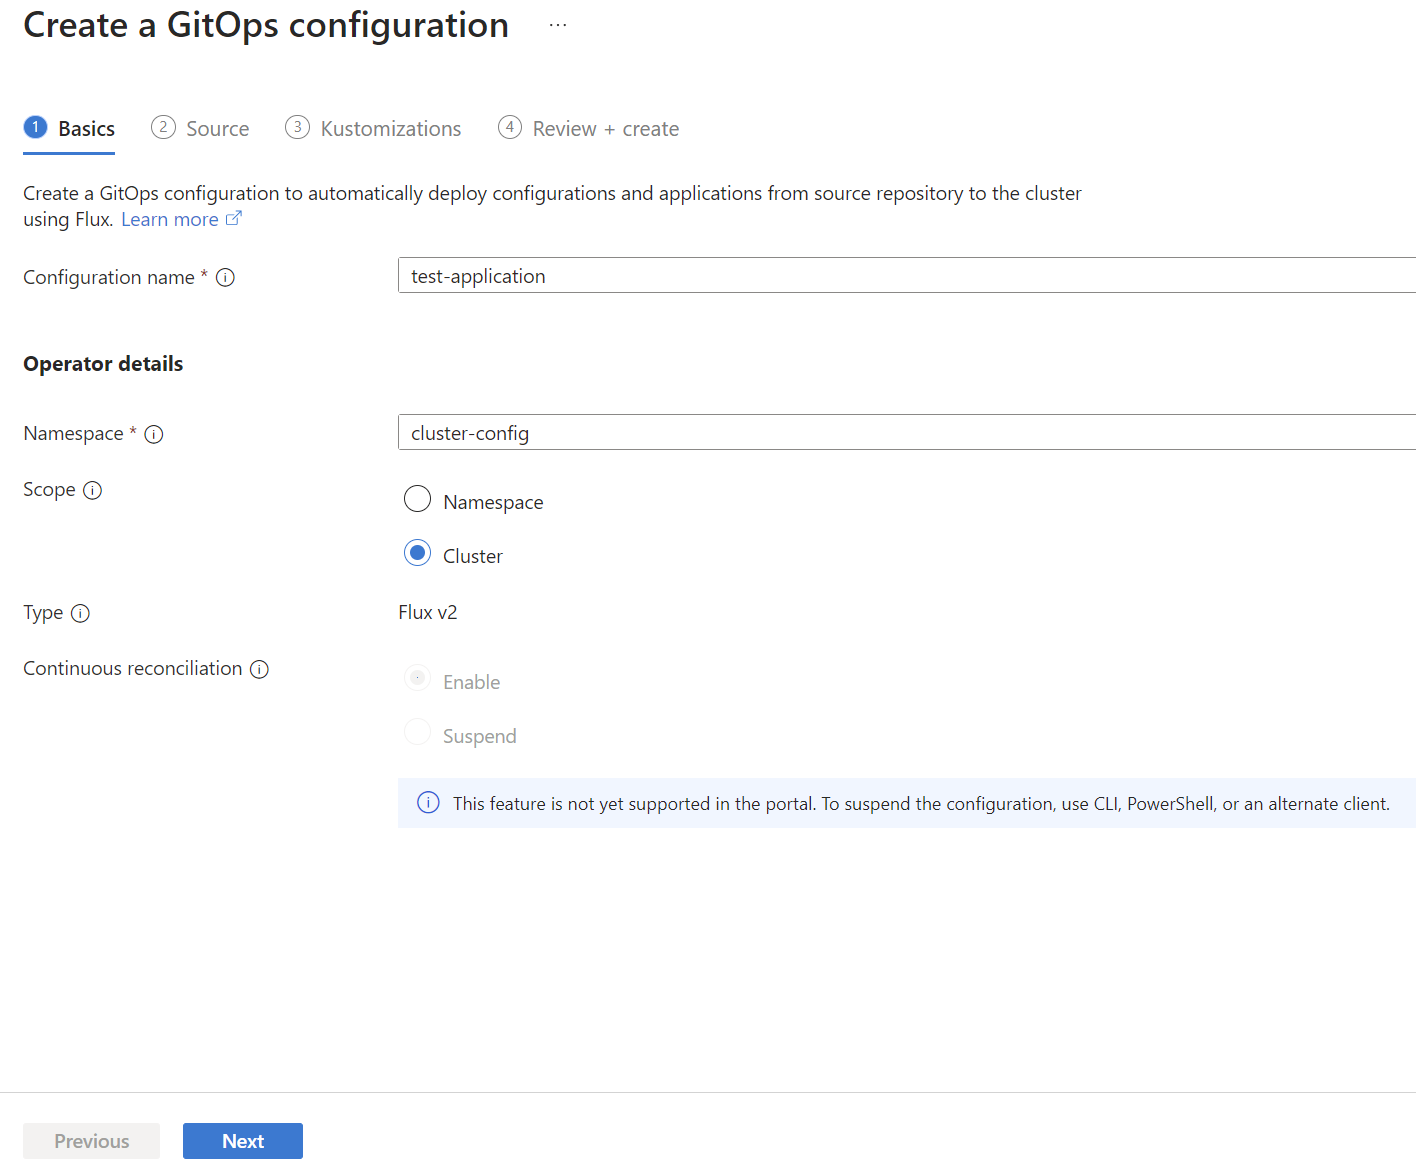 Screenshot showing the Basics options for a GitOps configuration in the Azure portal.